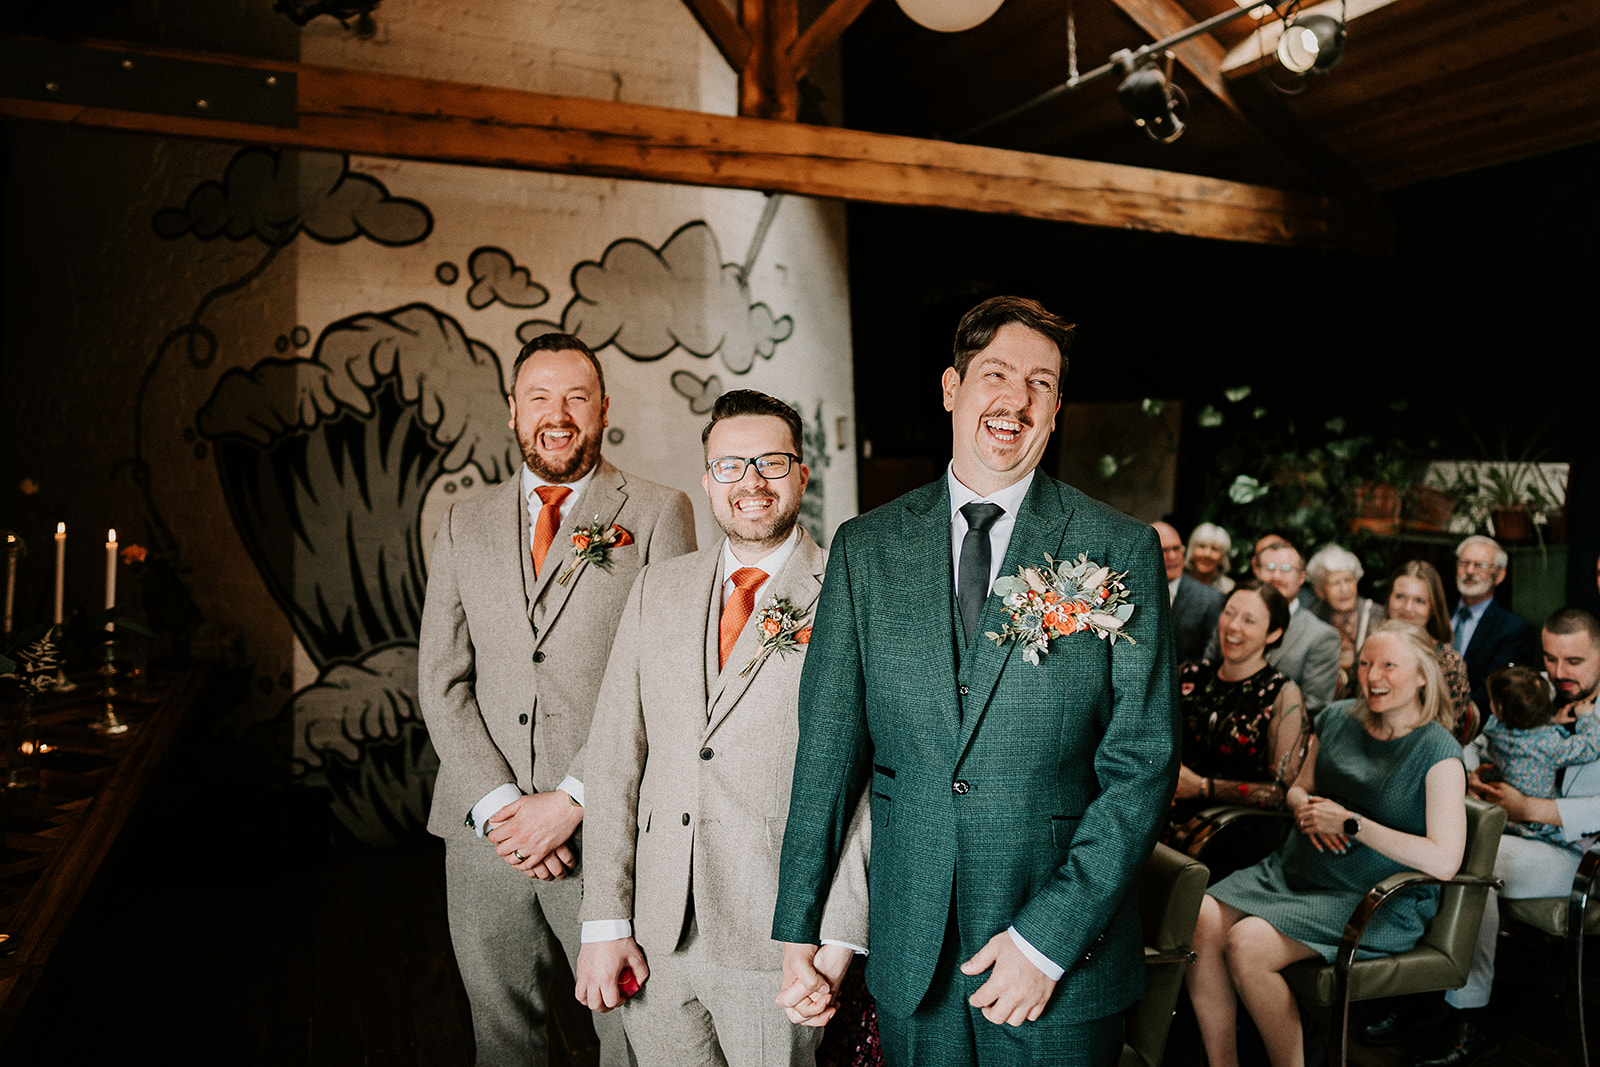 Relaxed Spring Wedding at The Chimney House & The Mowbray | Mirl & Co